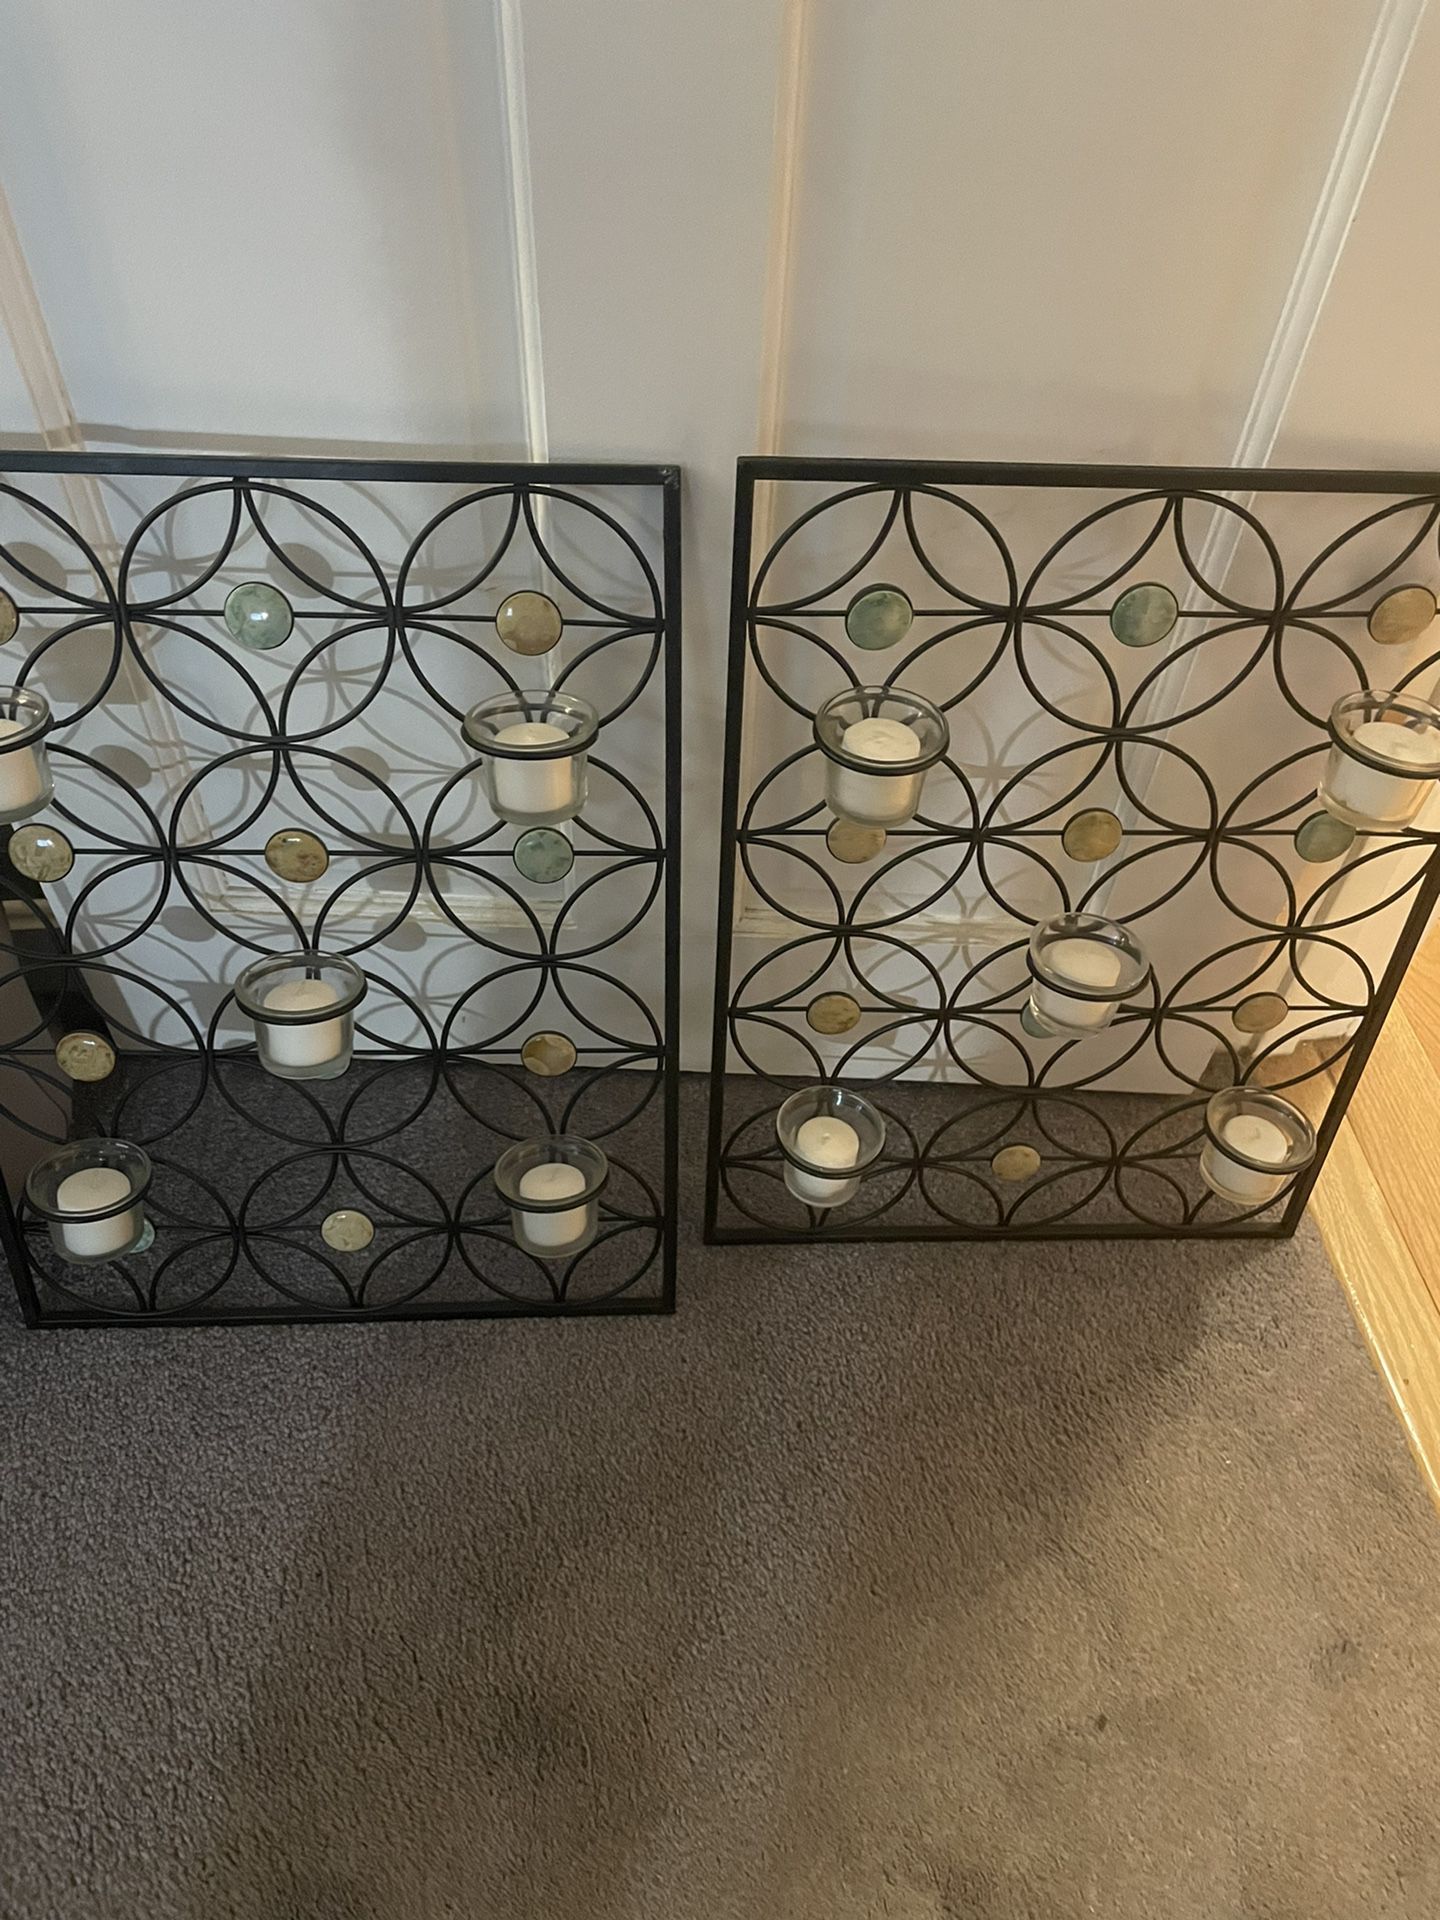 (2) Wrought Iron Wall Candle Holders